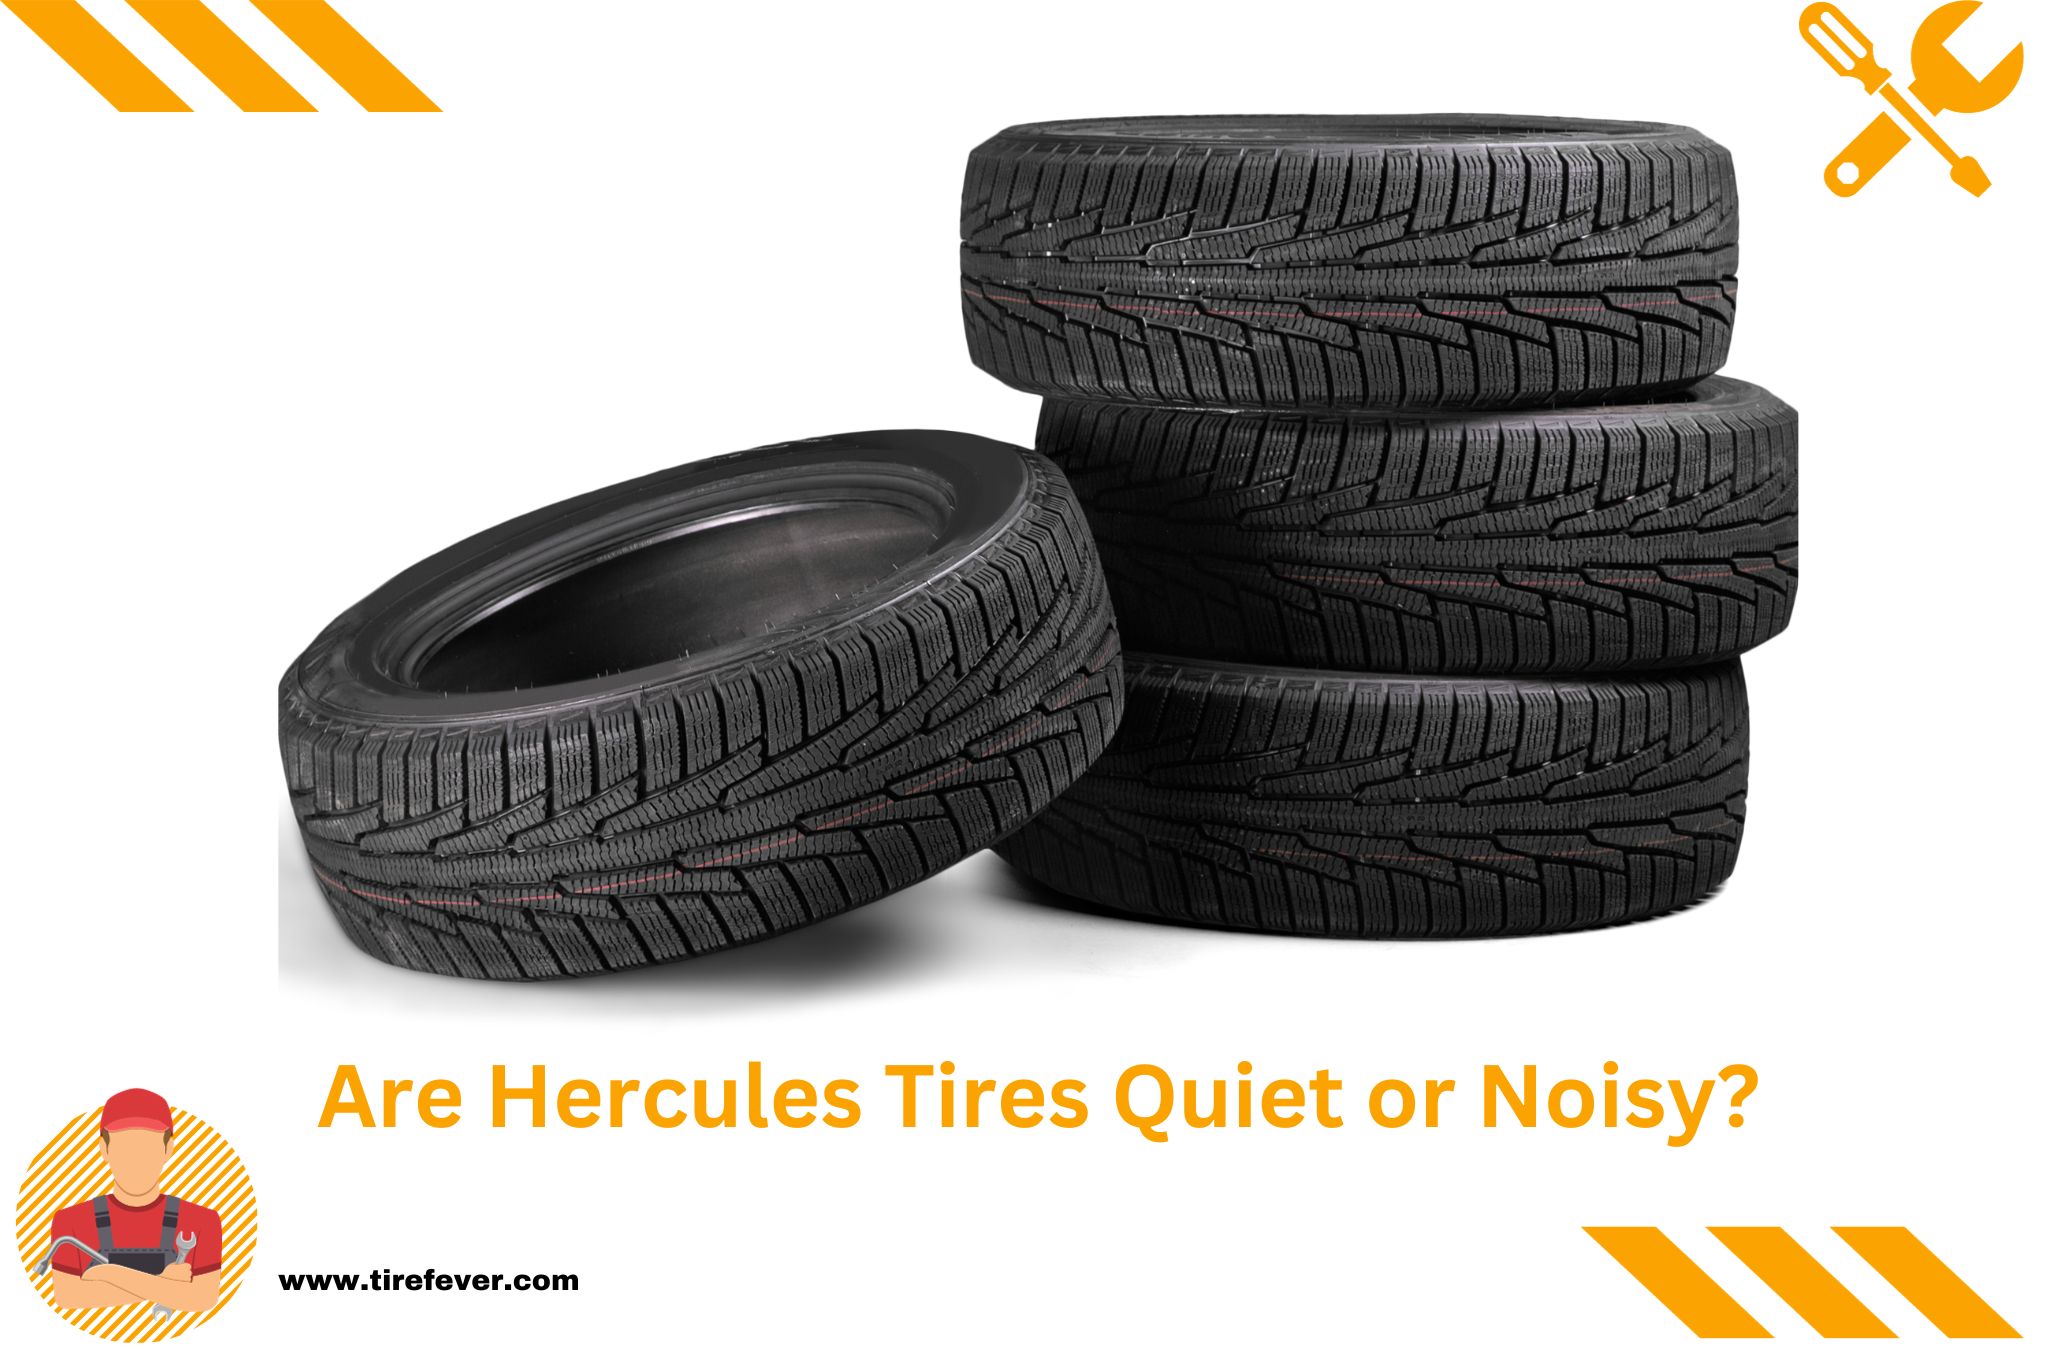 Are Hercules Tires Quiet or Noisy?